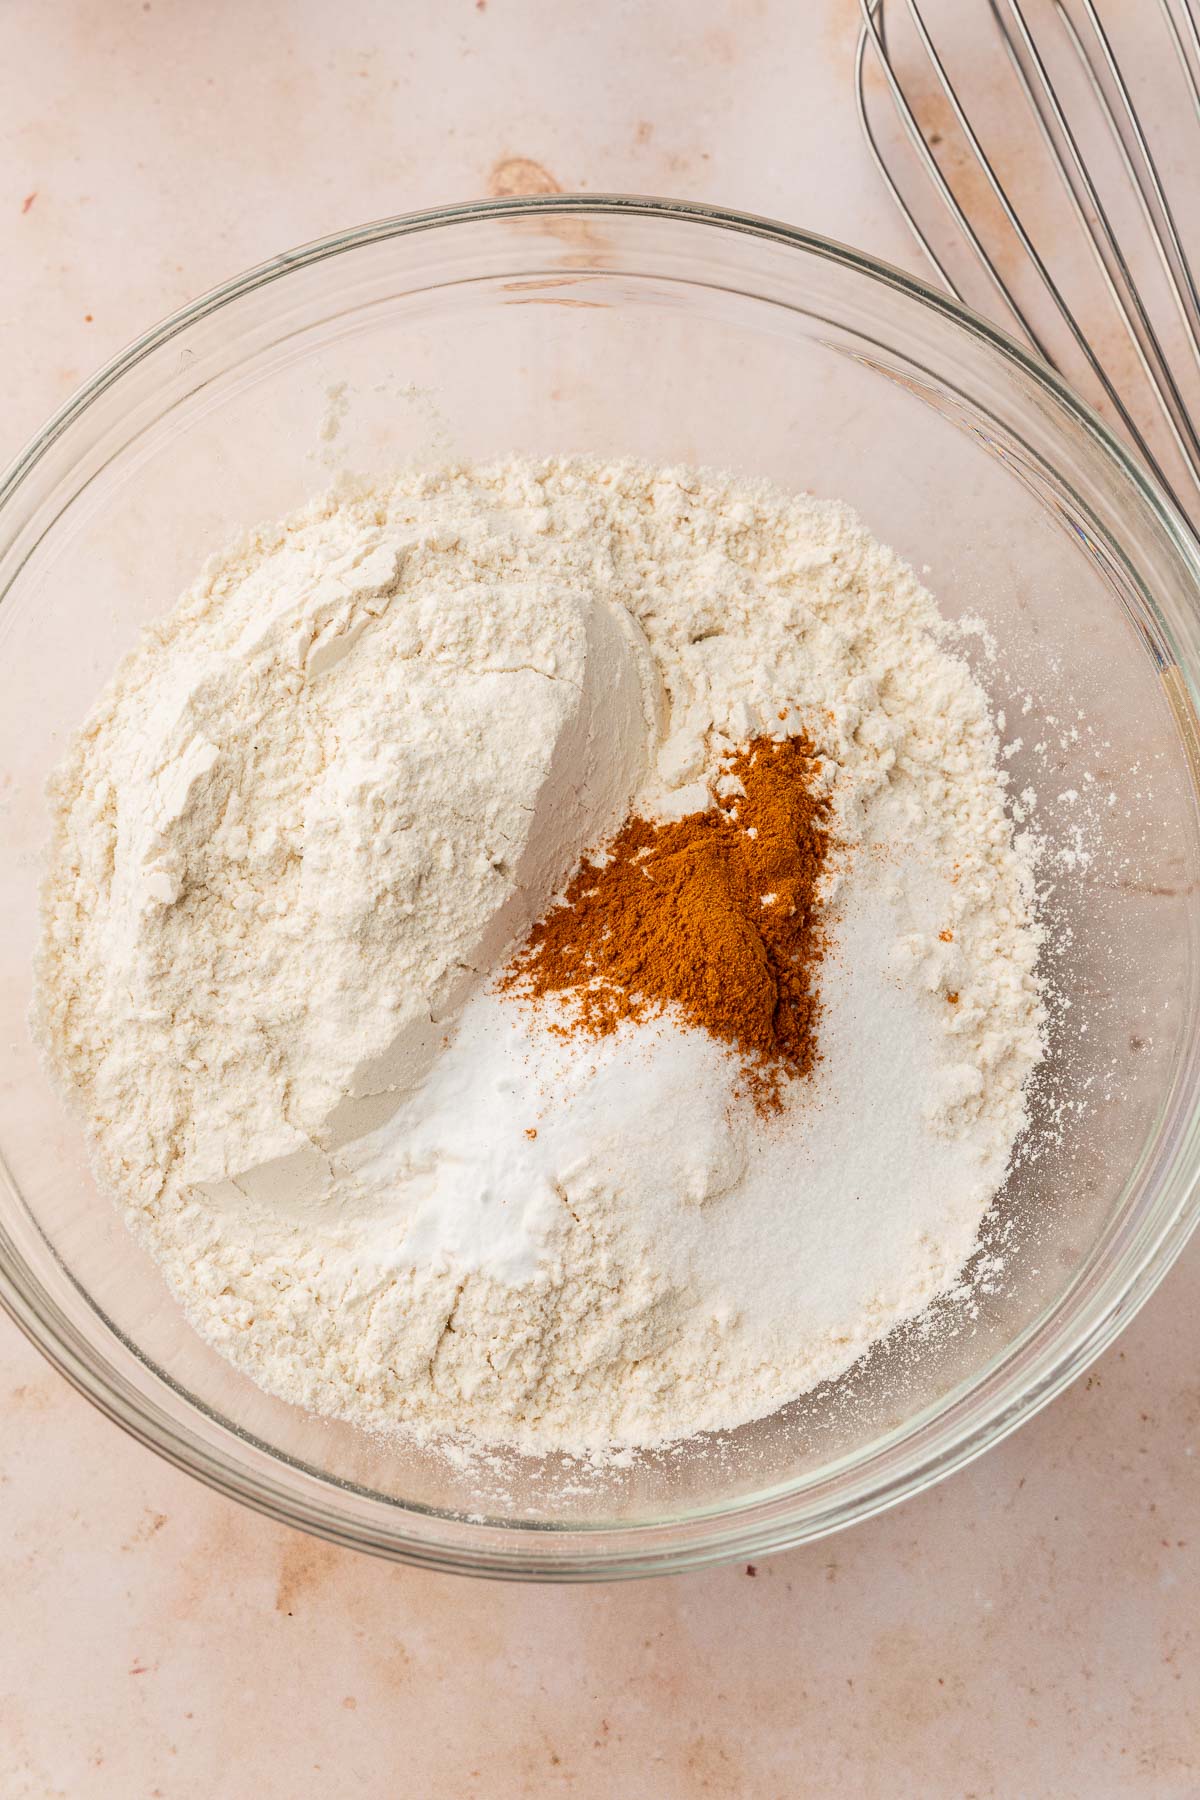 A glass mixing bowl with gluten-free flour, cinnamon, salt and baking soda in it before mixing together.